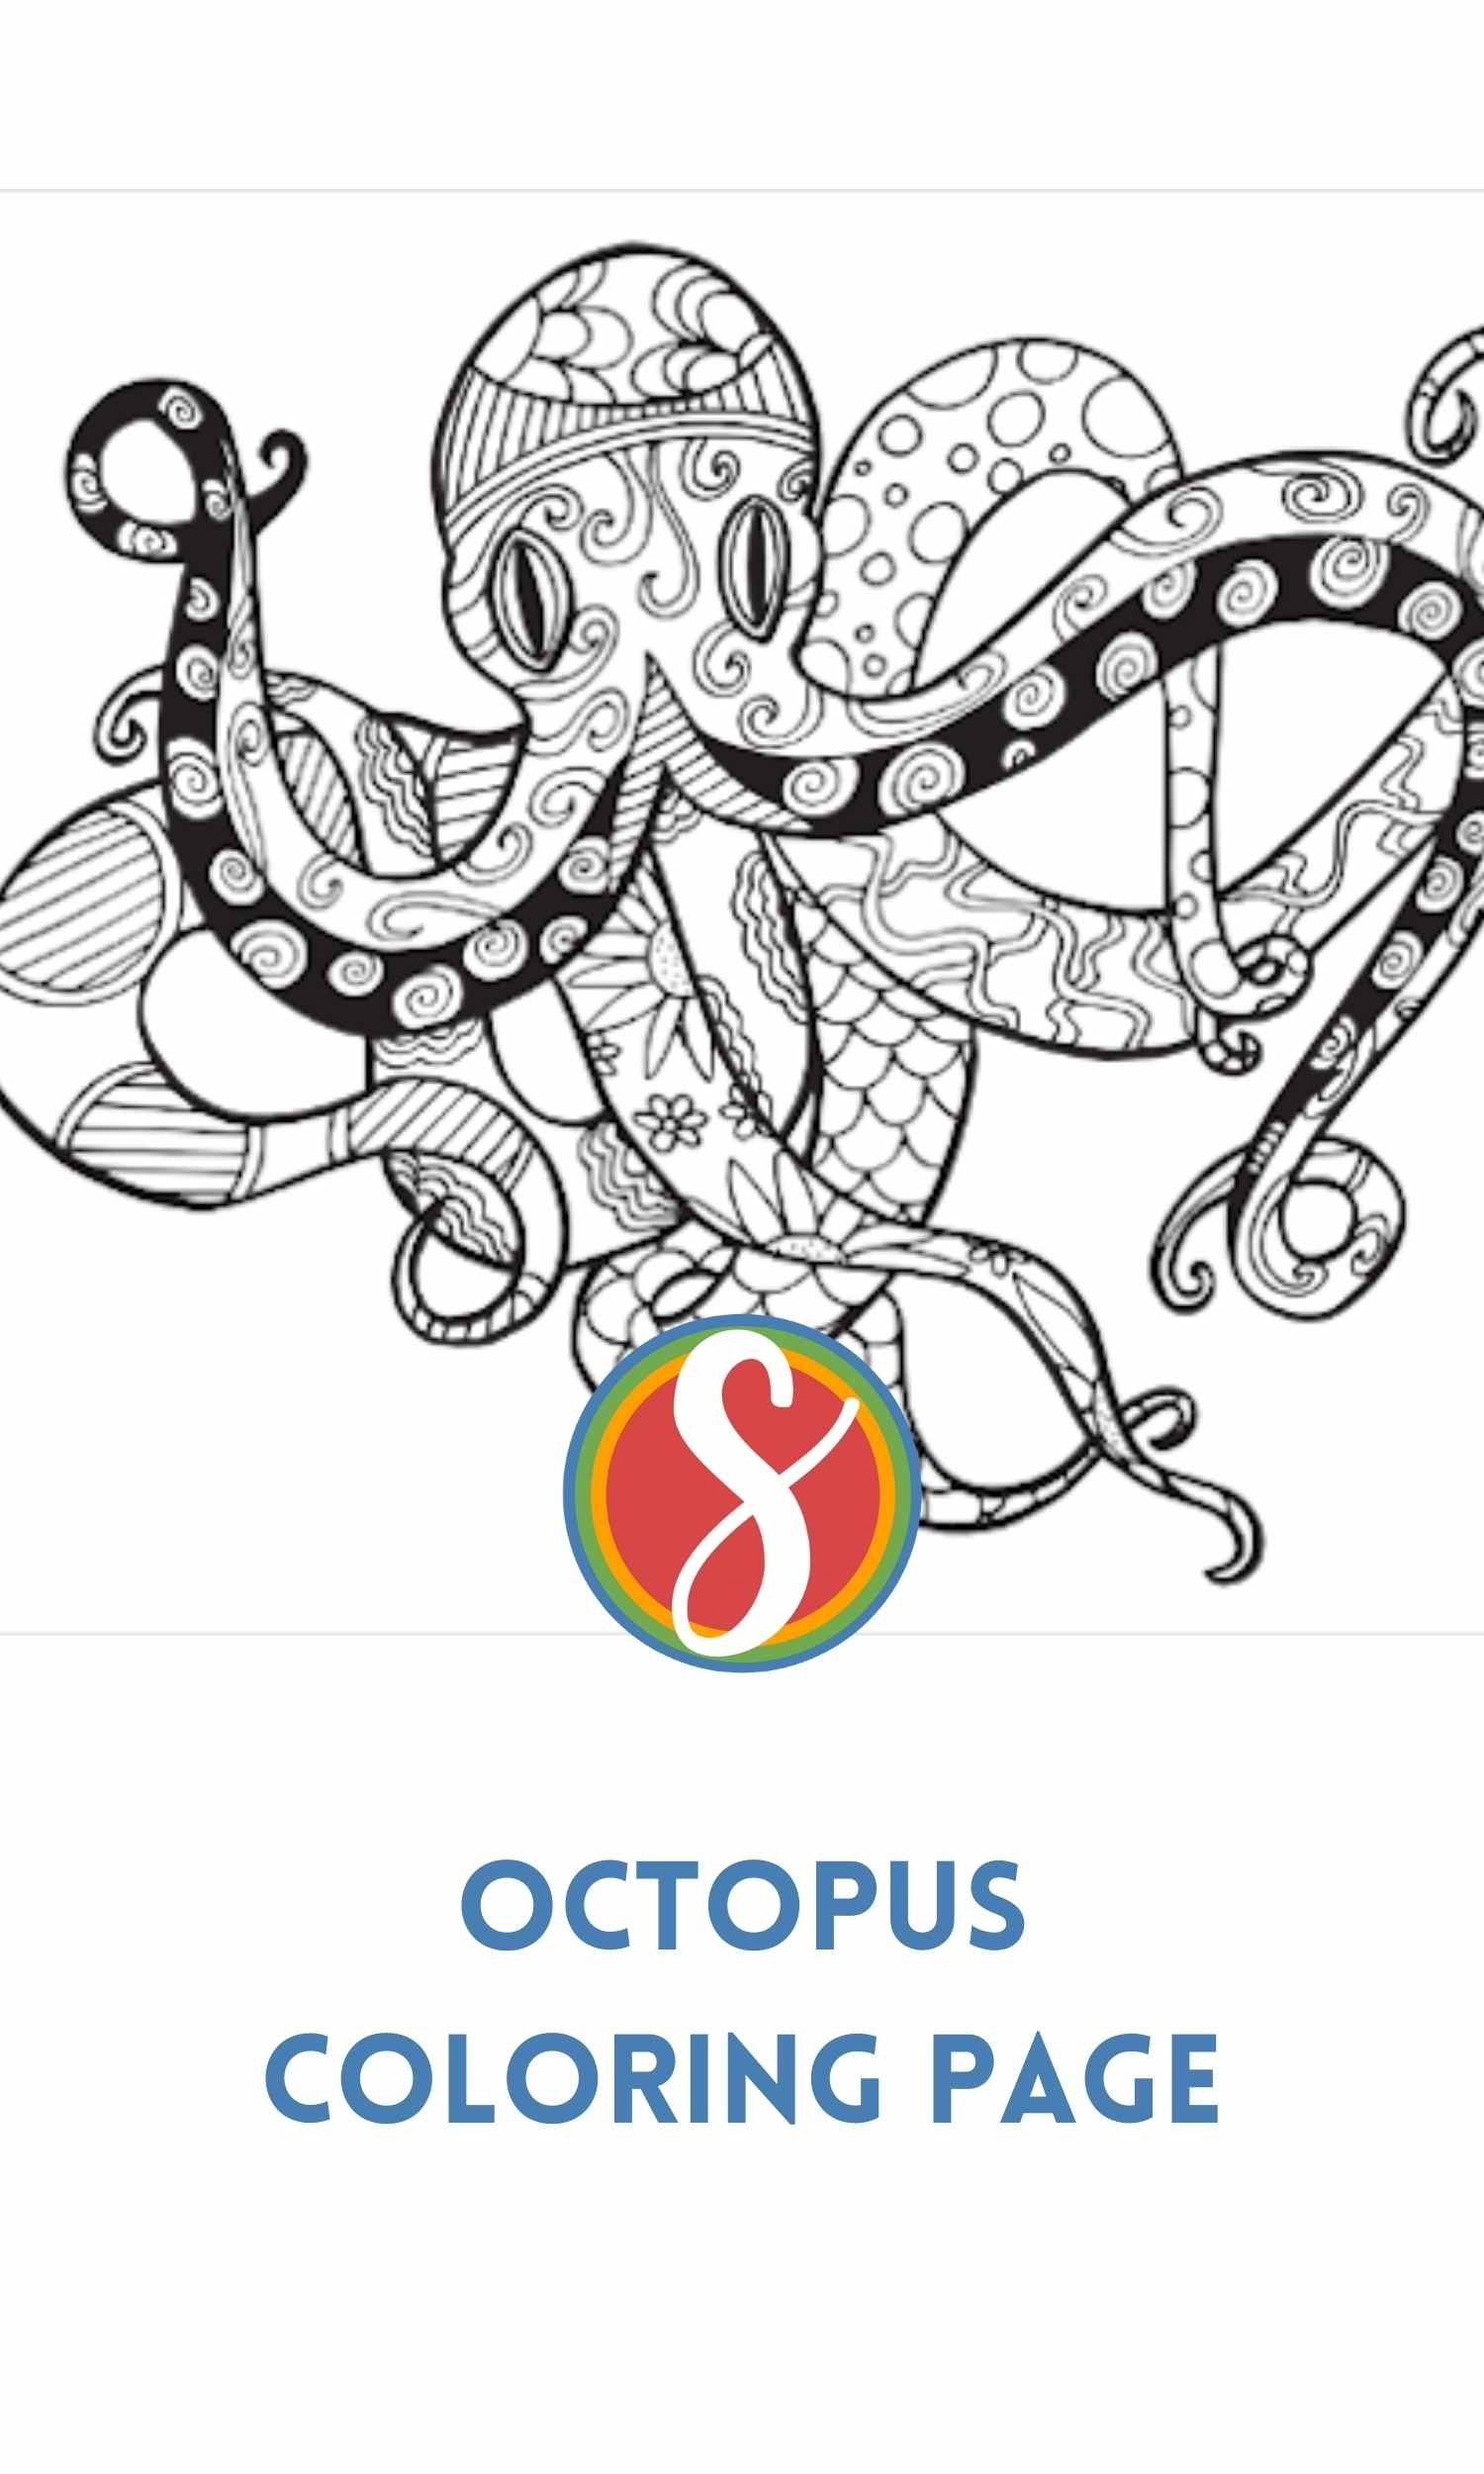 An octopus drawing with complicated doodles inside for a great octopus adult coloring page